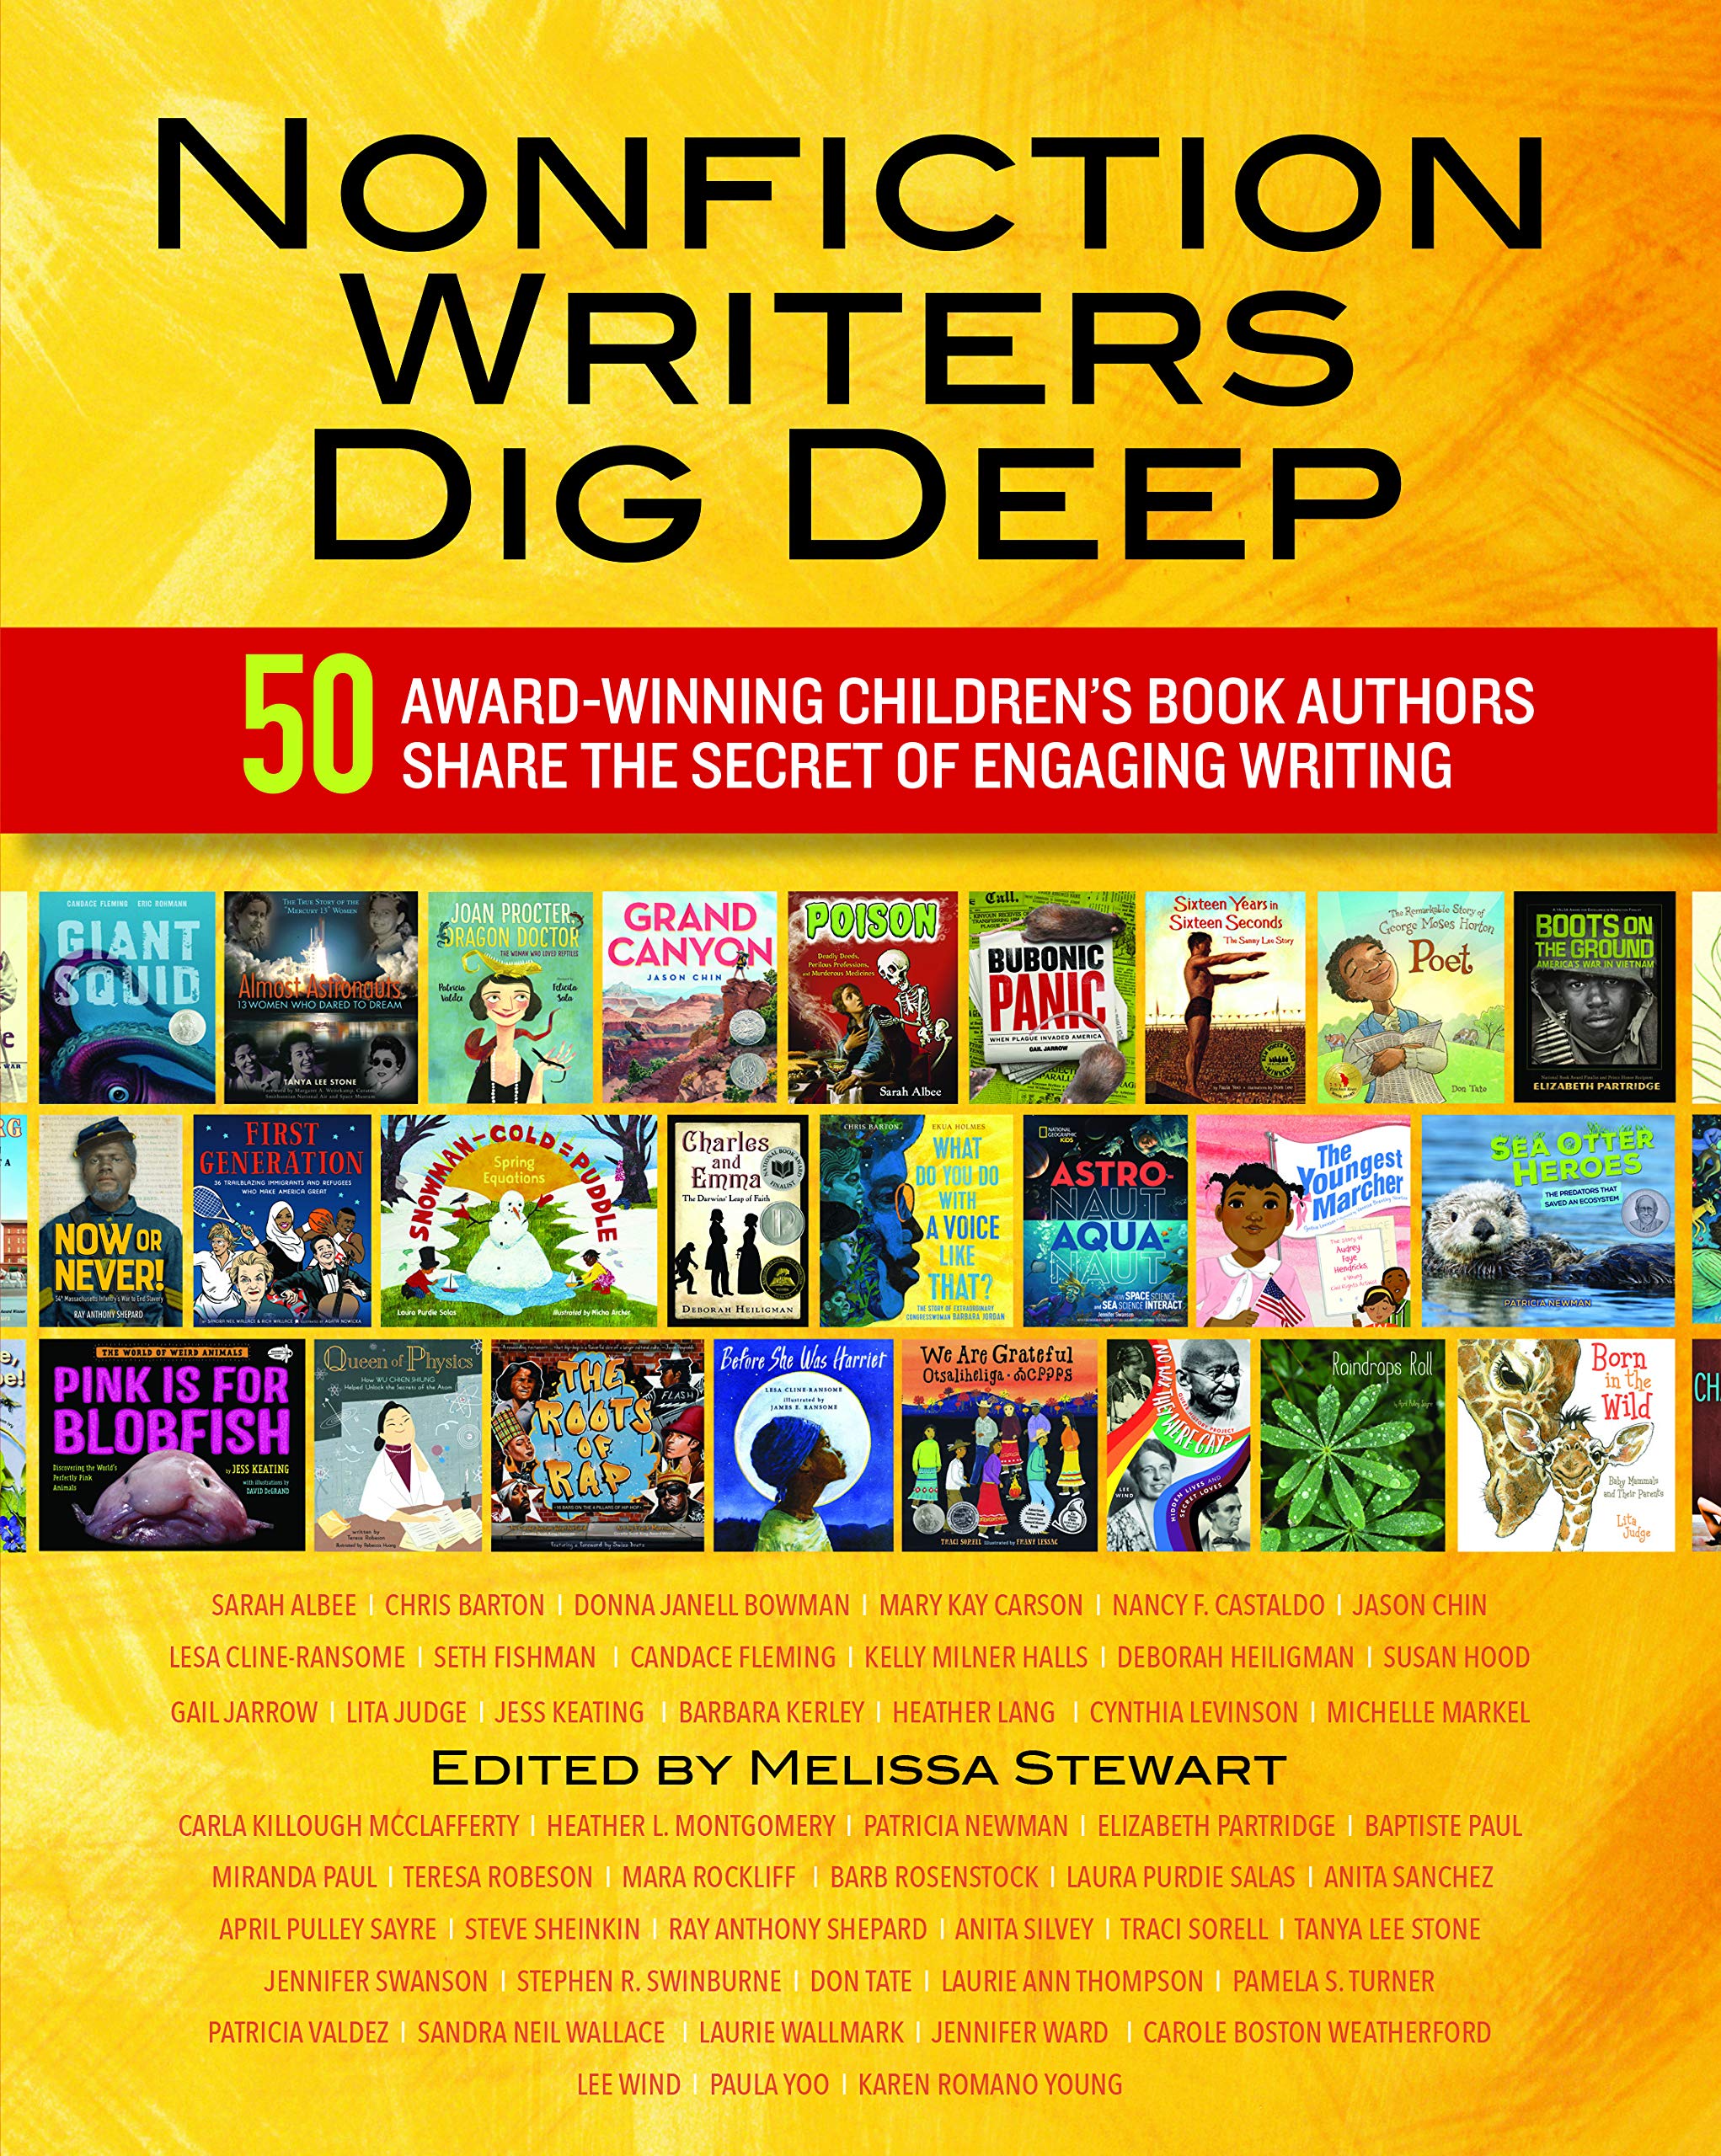 Nonfiction Writers Dig Deep: 50 Award-Winning Children’s Book Authors Share the Secret of Engaging Writing